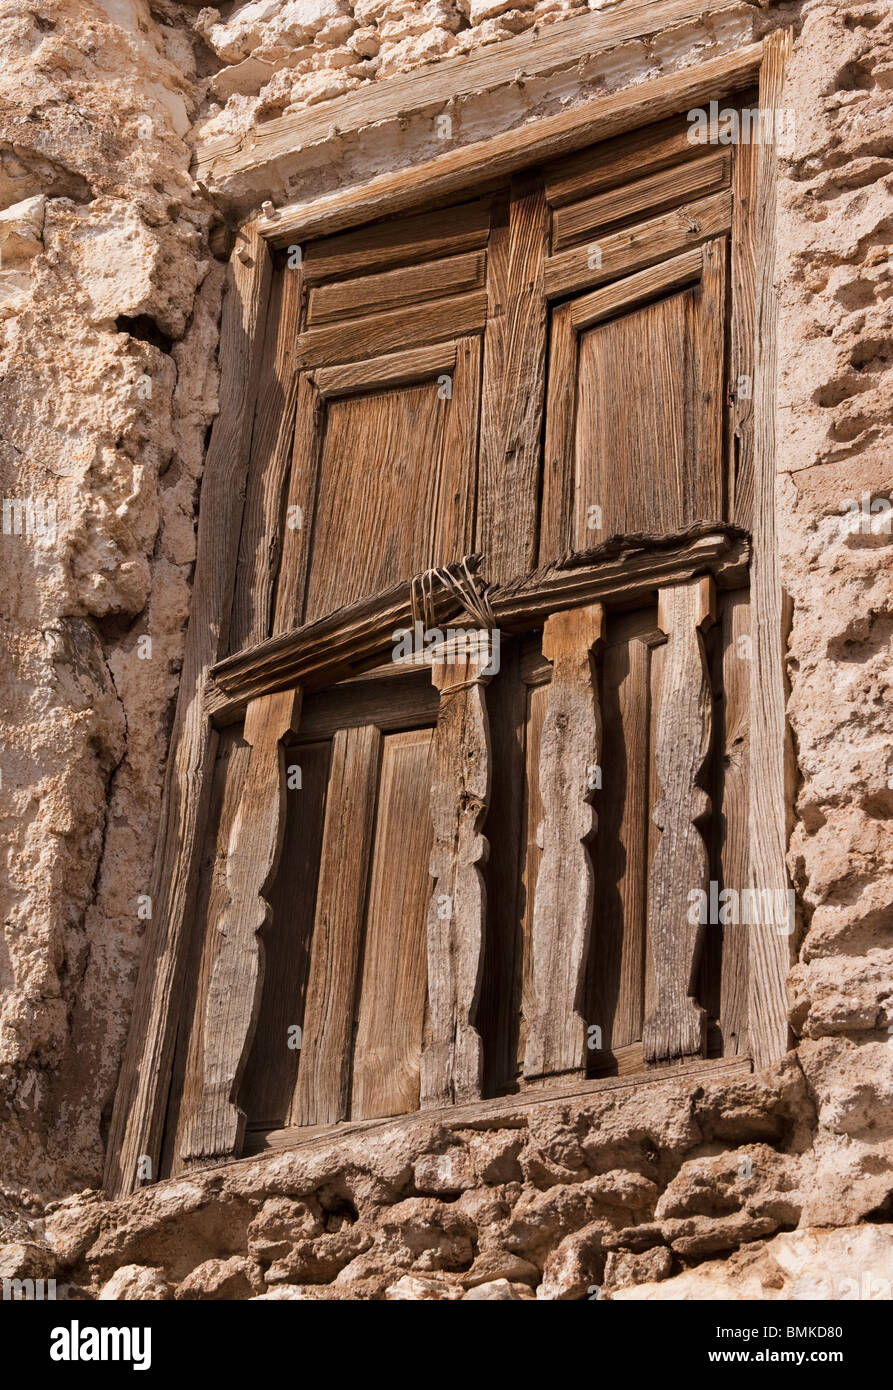 An old wooden door in an Andalucian village Stock Photo